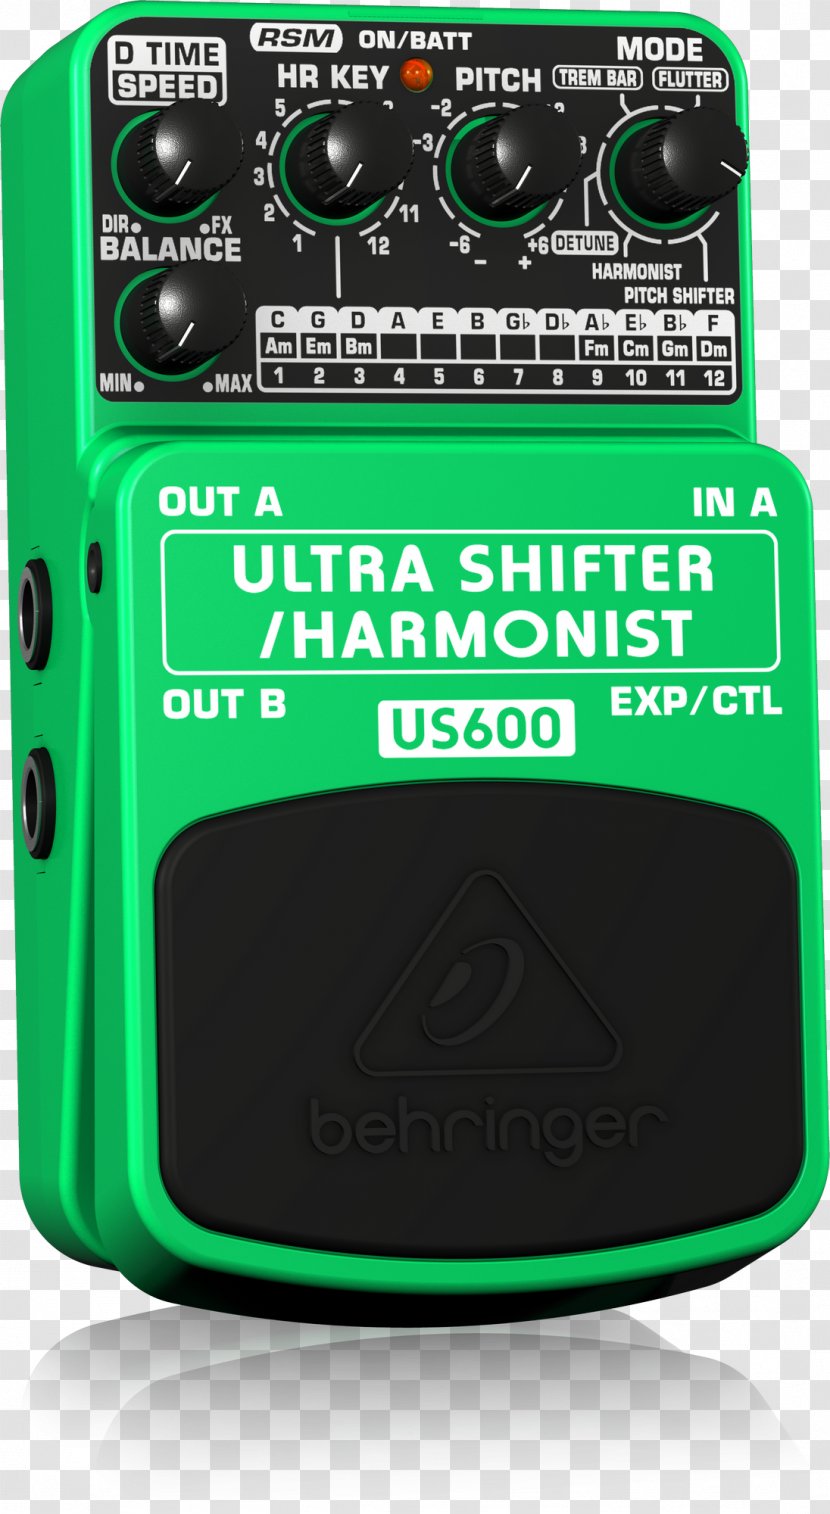 BEHRINGER ULTRA SHIFTER/HARMONIST US600 Effects Processors & Pedals Electric Guitar Behringer Micromix MX400 - Electronics Accessory Transparent PNG